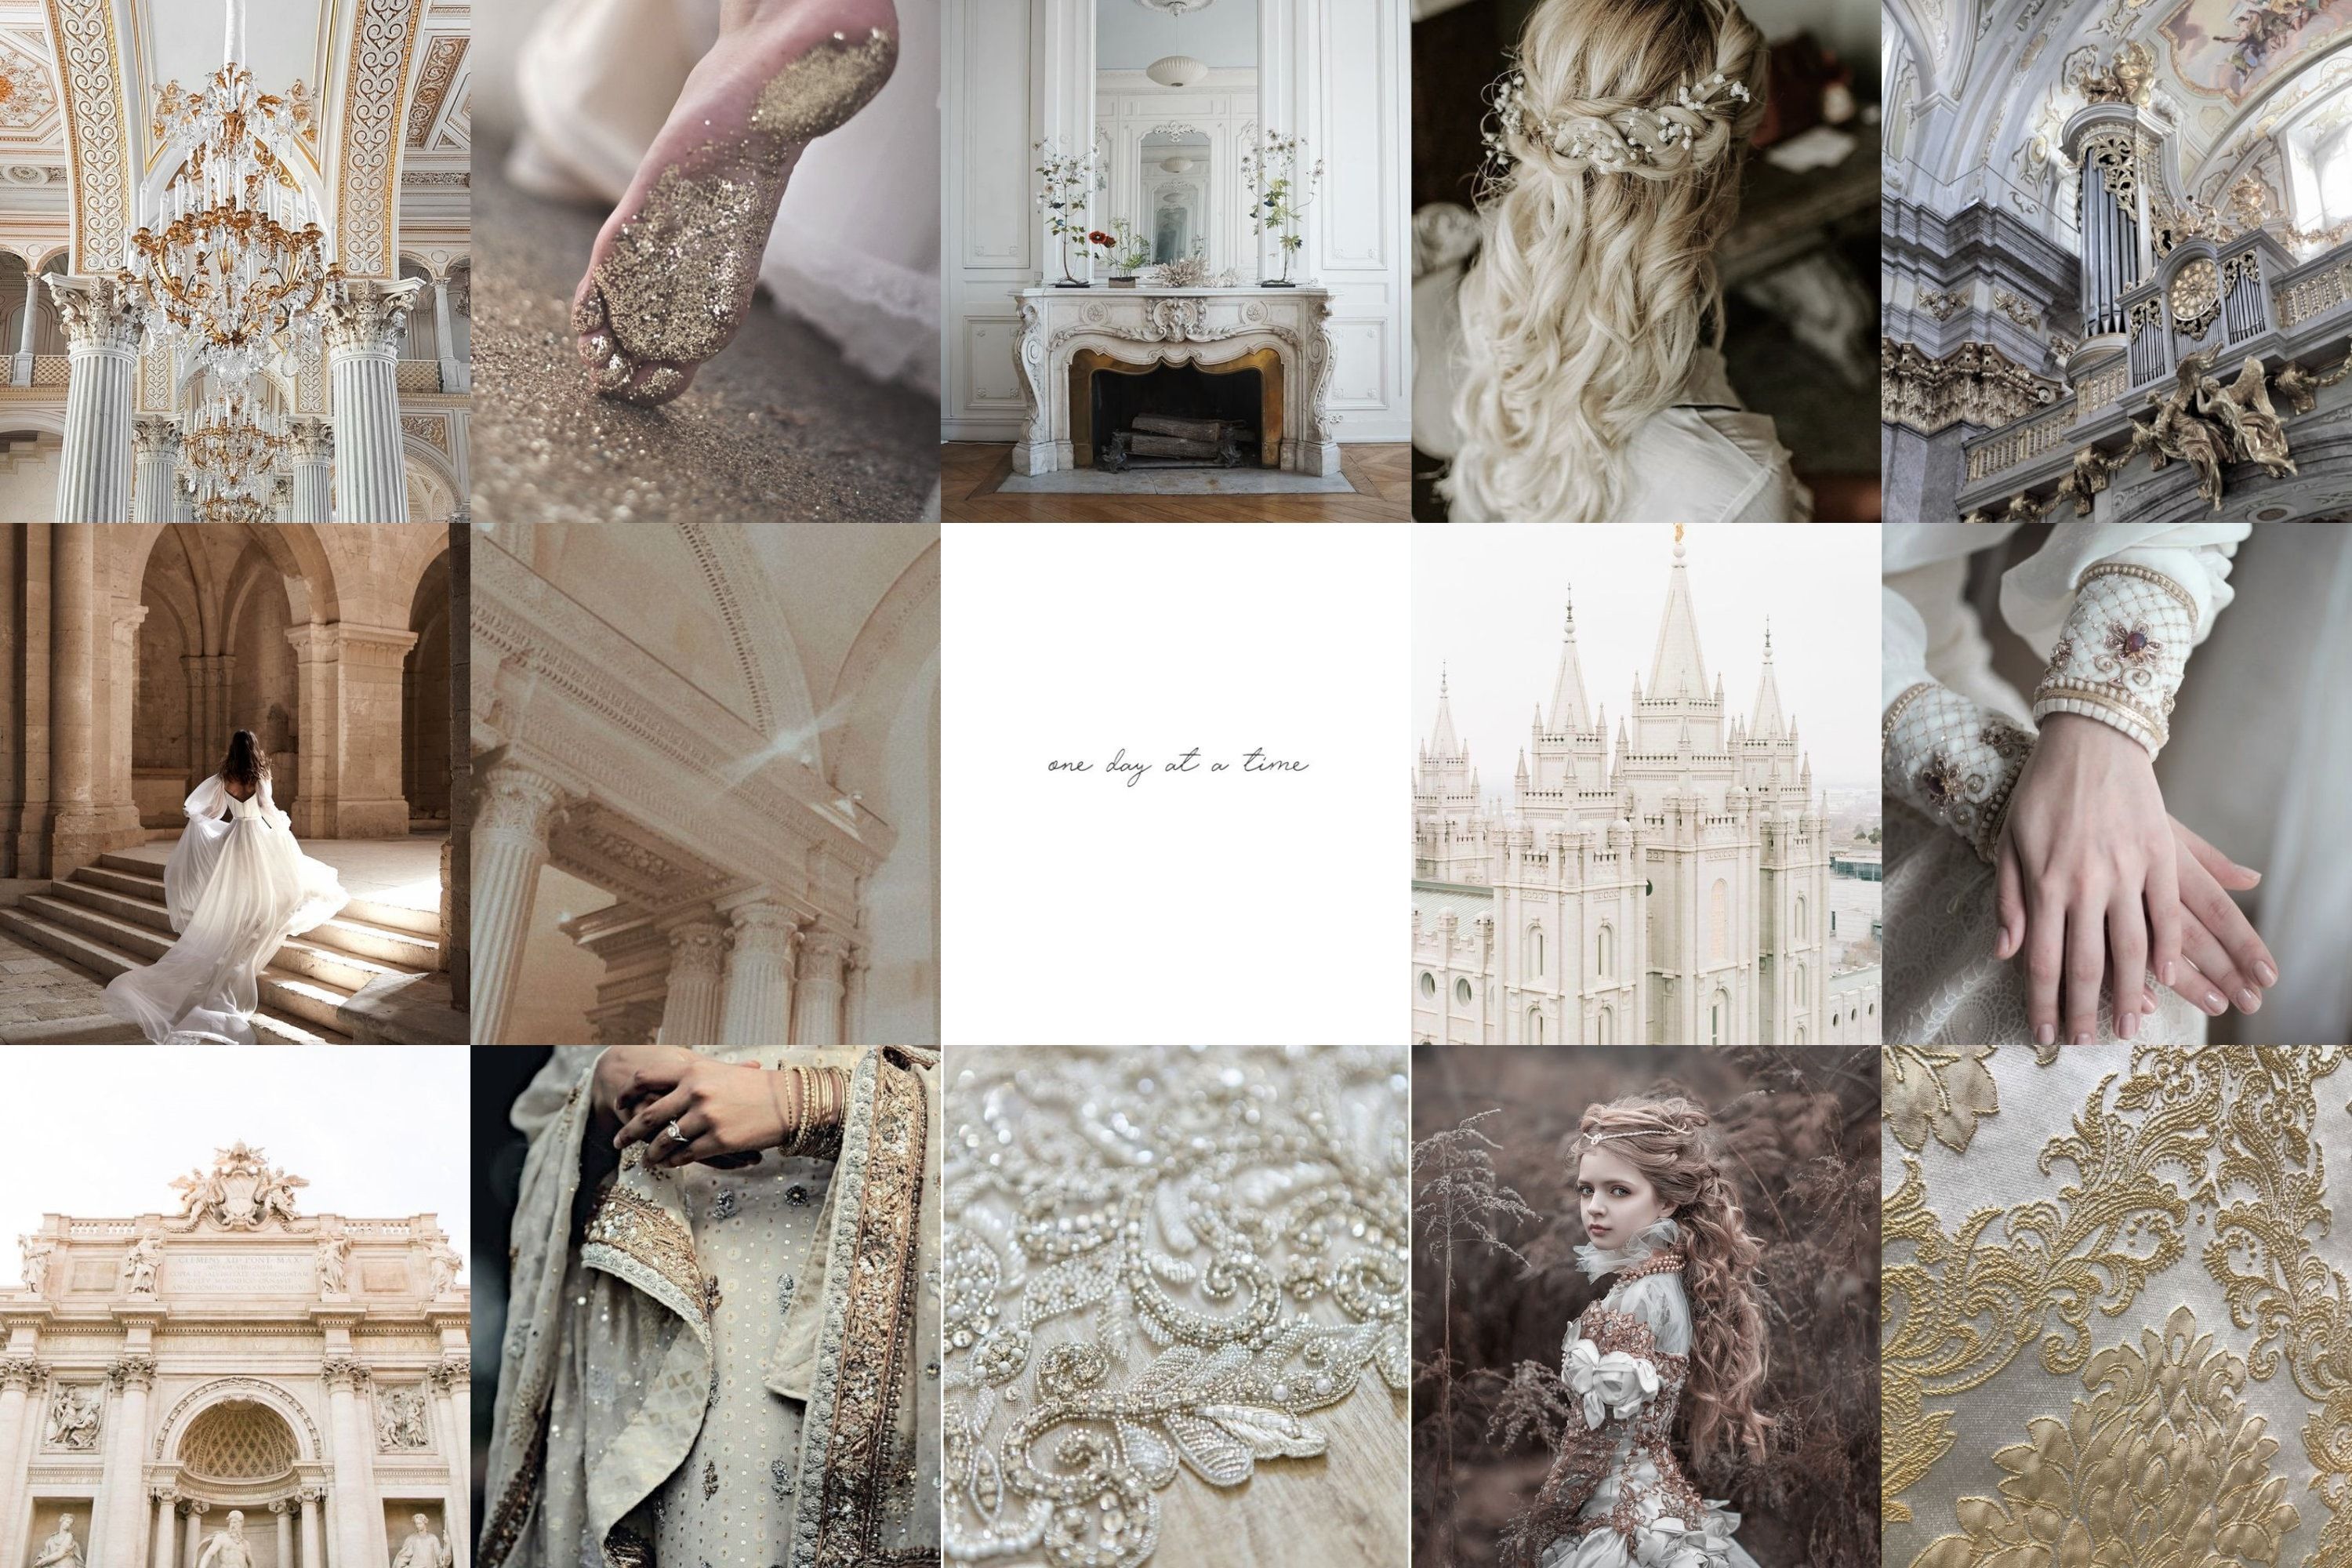 A collage of images including a dress, a cathedral, a book, and a woman's hands. - Royalcore